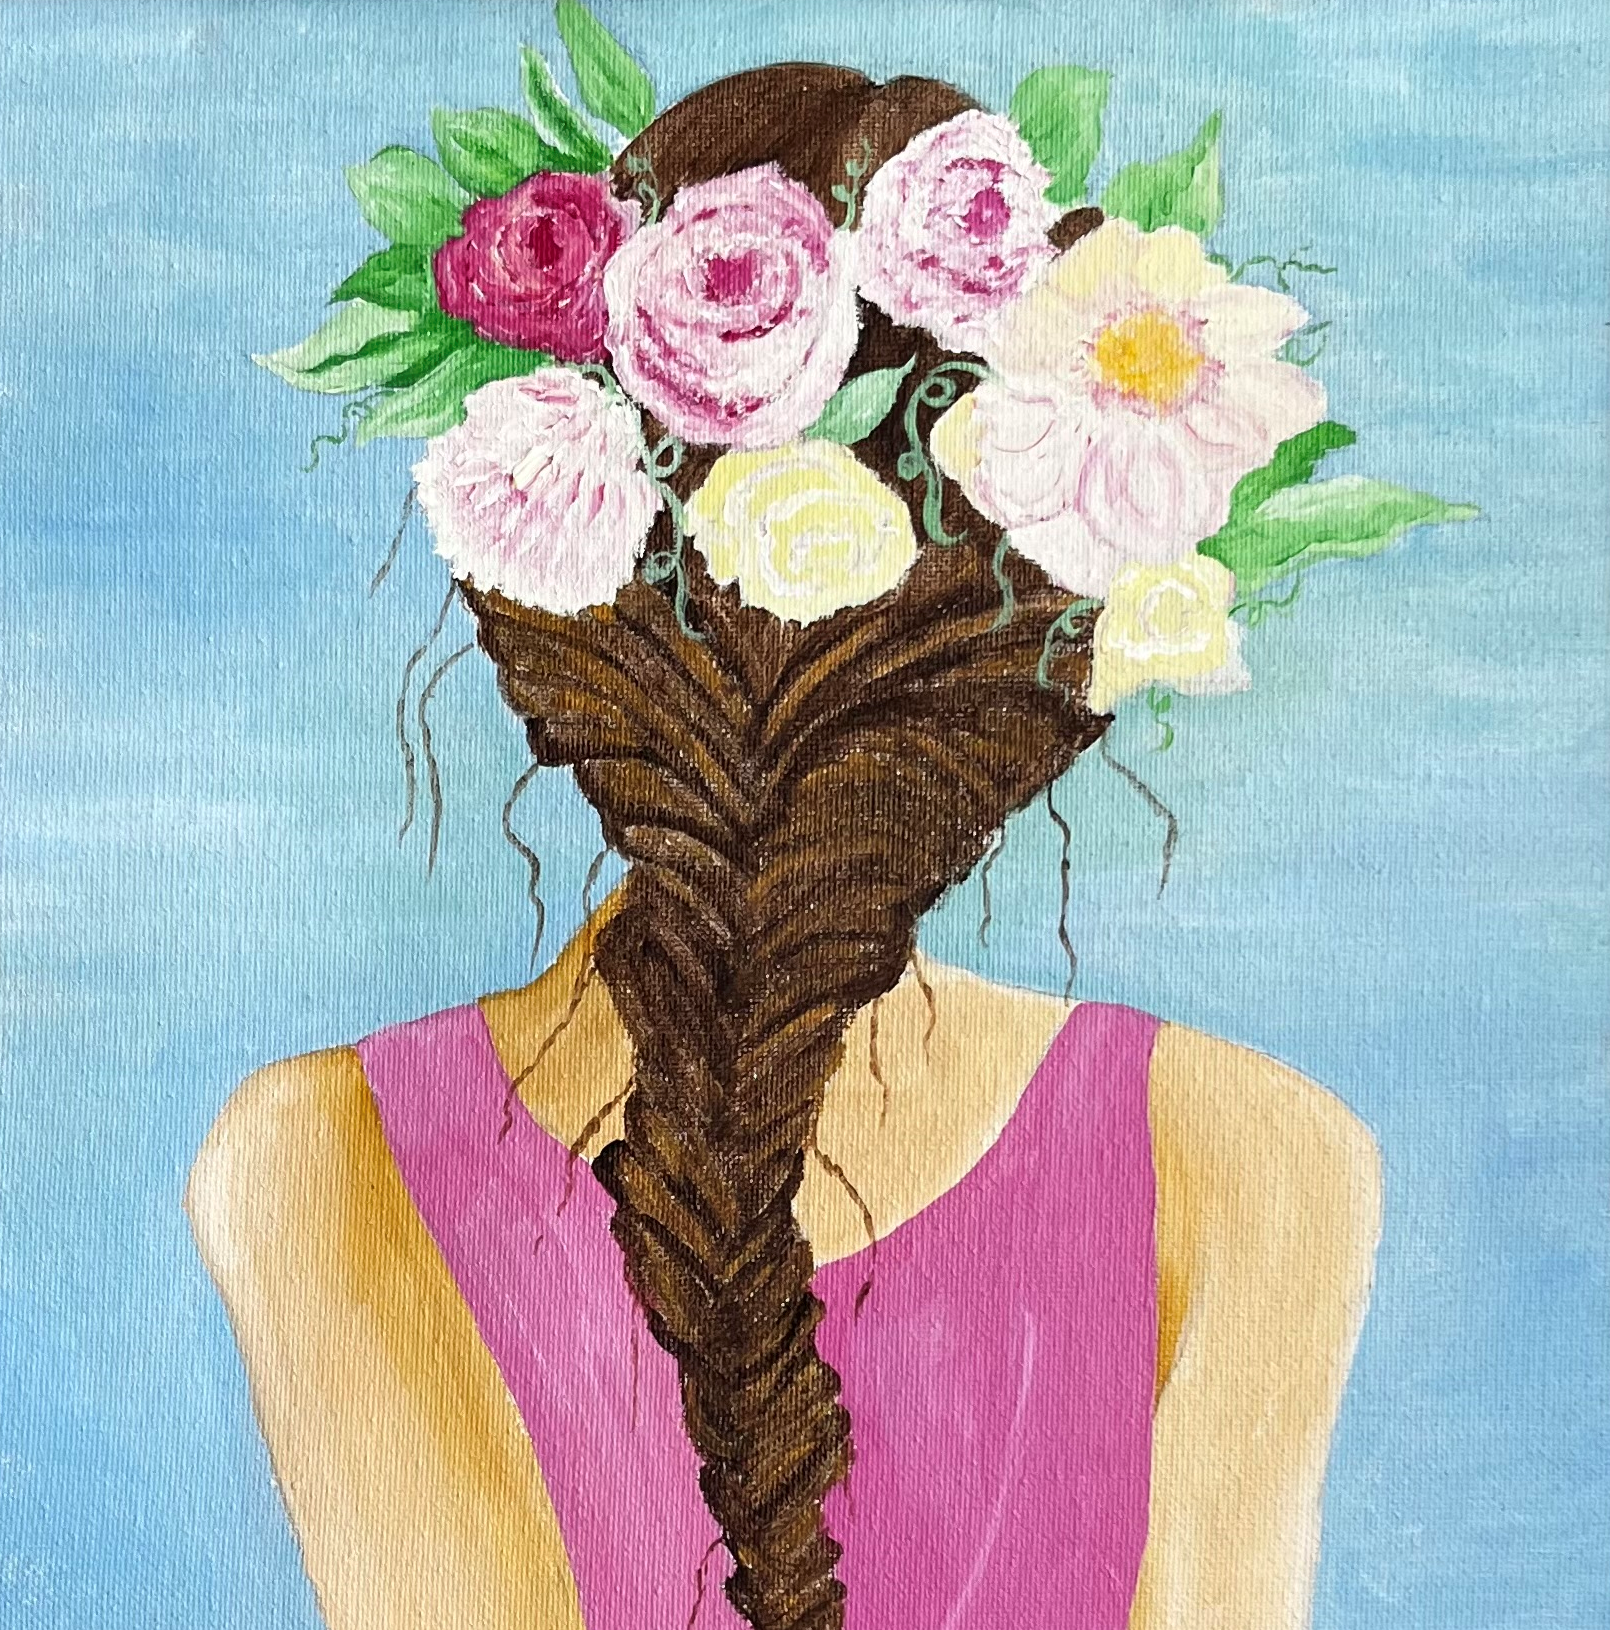 A painting of a girl with flowers in her hair by June artist Janice Olenio-Michienzi